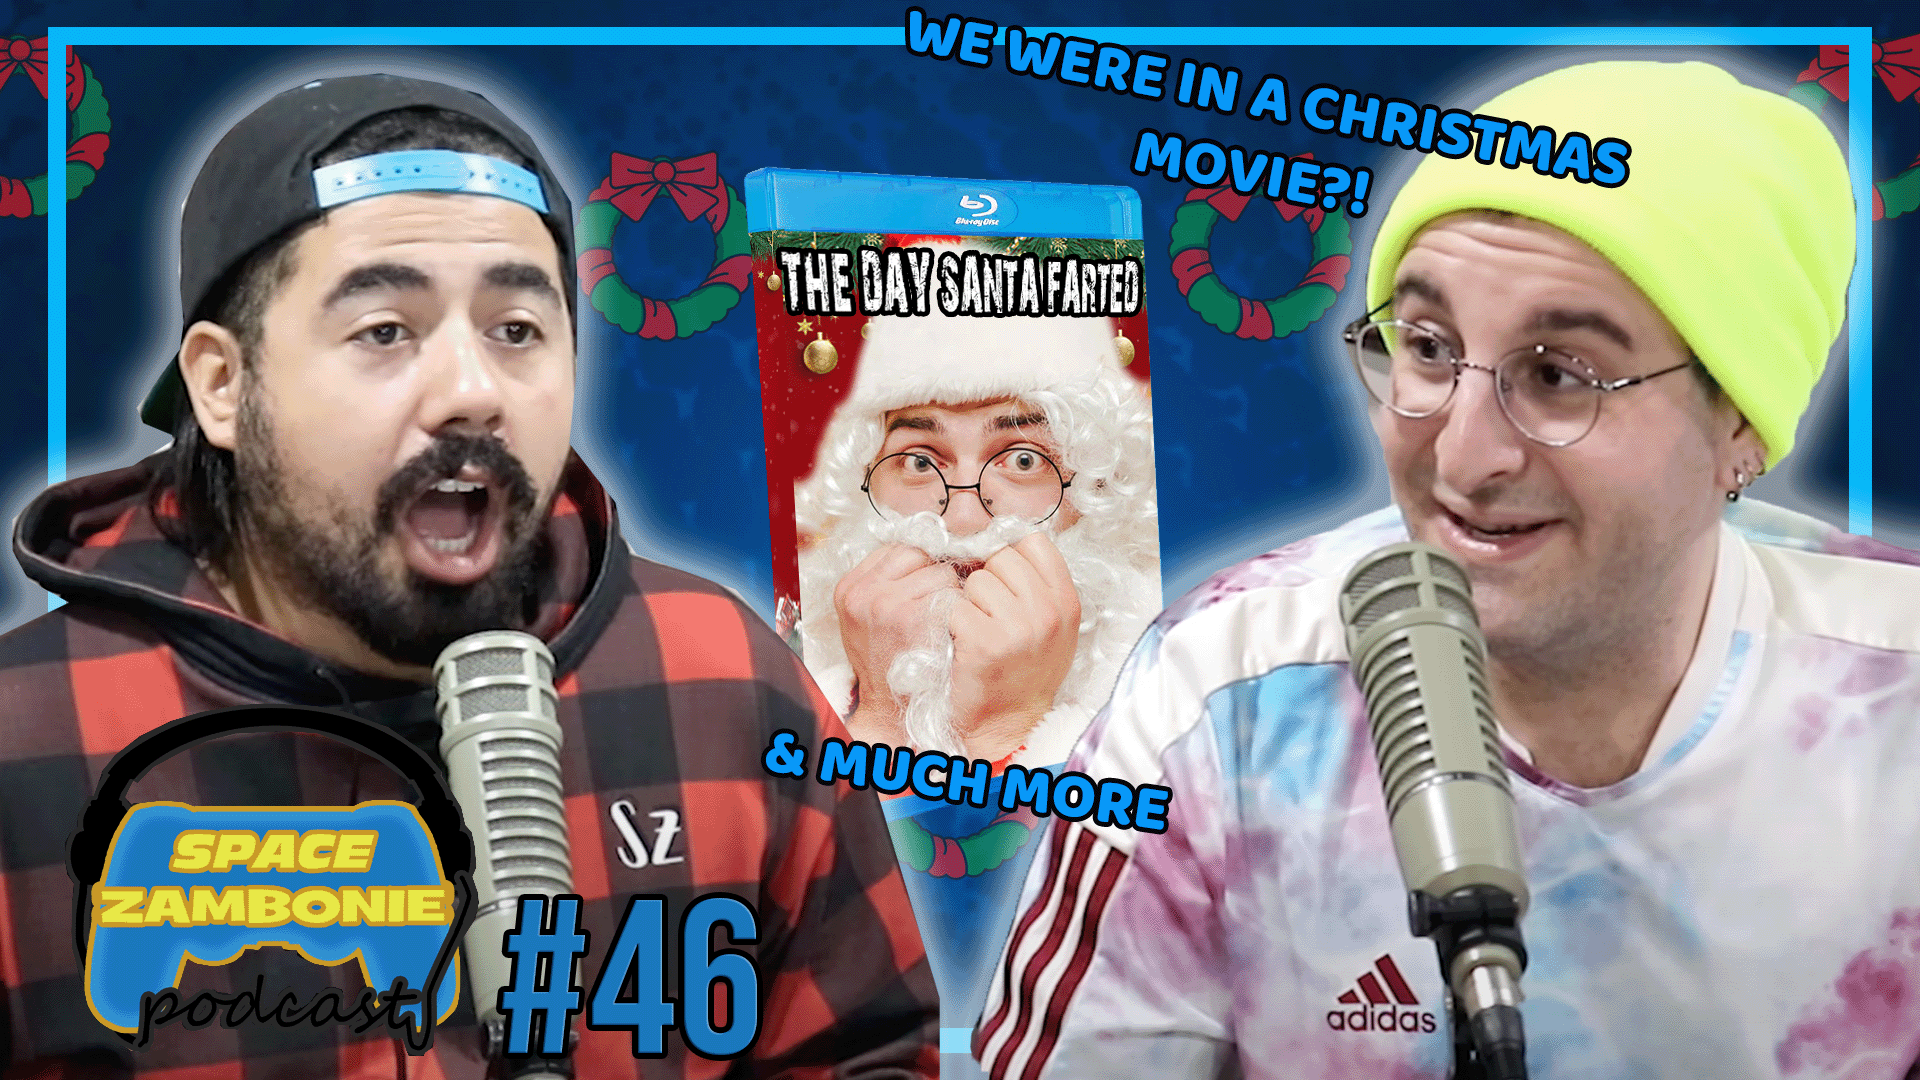 WE WERE IN A CHRISTMAS MOVIE?!